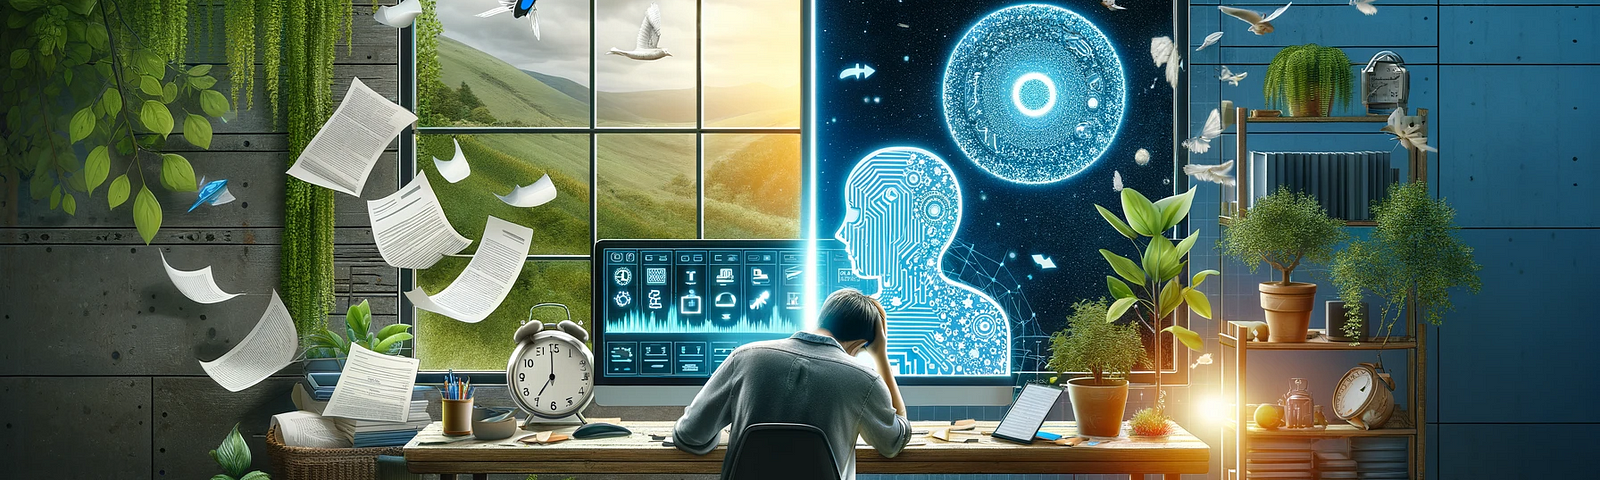 An illustrative contrast between stress and tranquility in the context of AI integration. The left side shows a person overwhelmed at a cluttered desk with a malfunctioning computer, symbolizing stress. The right side depicts the same individual relaxed in a tidy and serene workspace, with a computer displaying a soothing AI interface, surrounded by nature elements, signifying stress reduction through AI